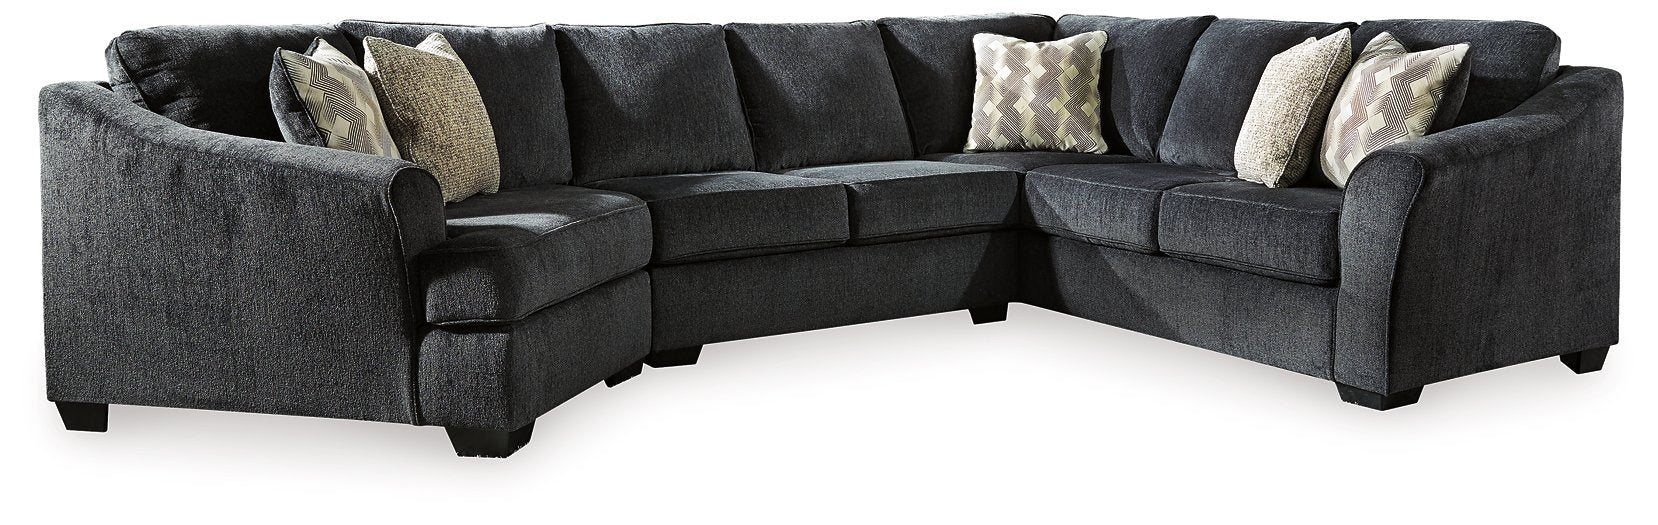 Eltmann 3-Piece Sectional with Cuddler image